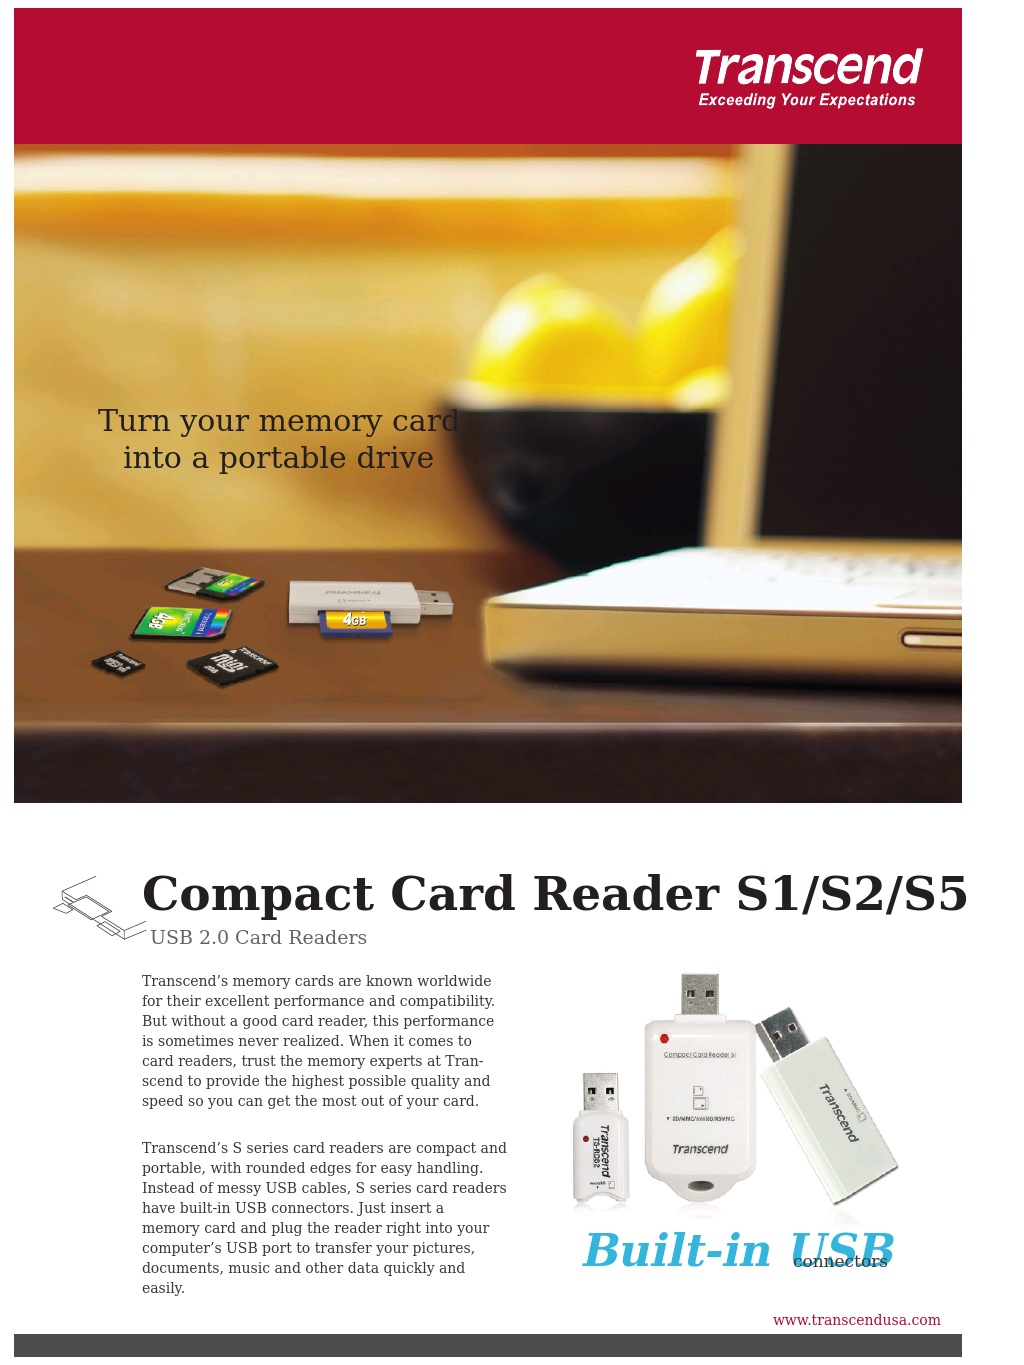 Compact Card Reader S2